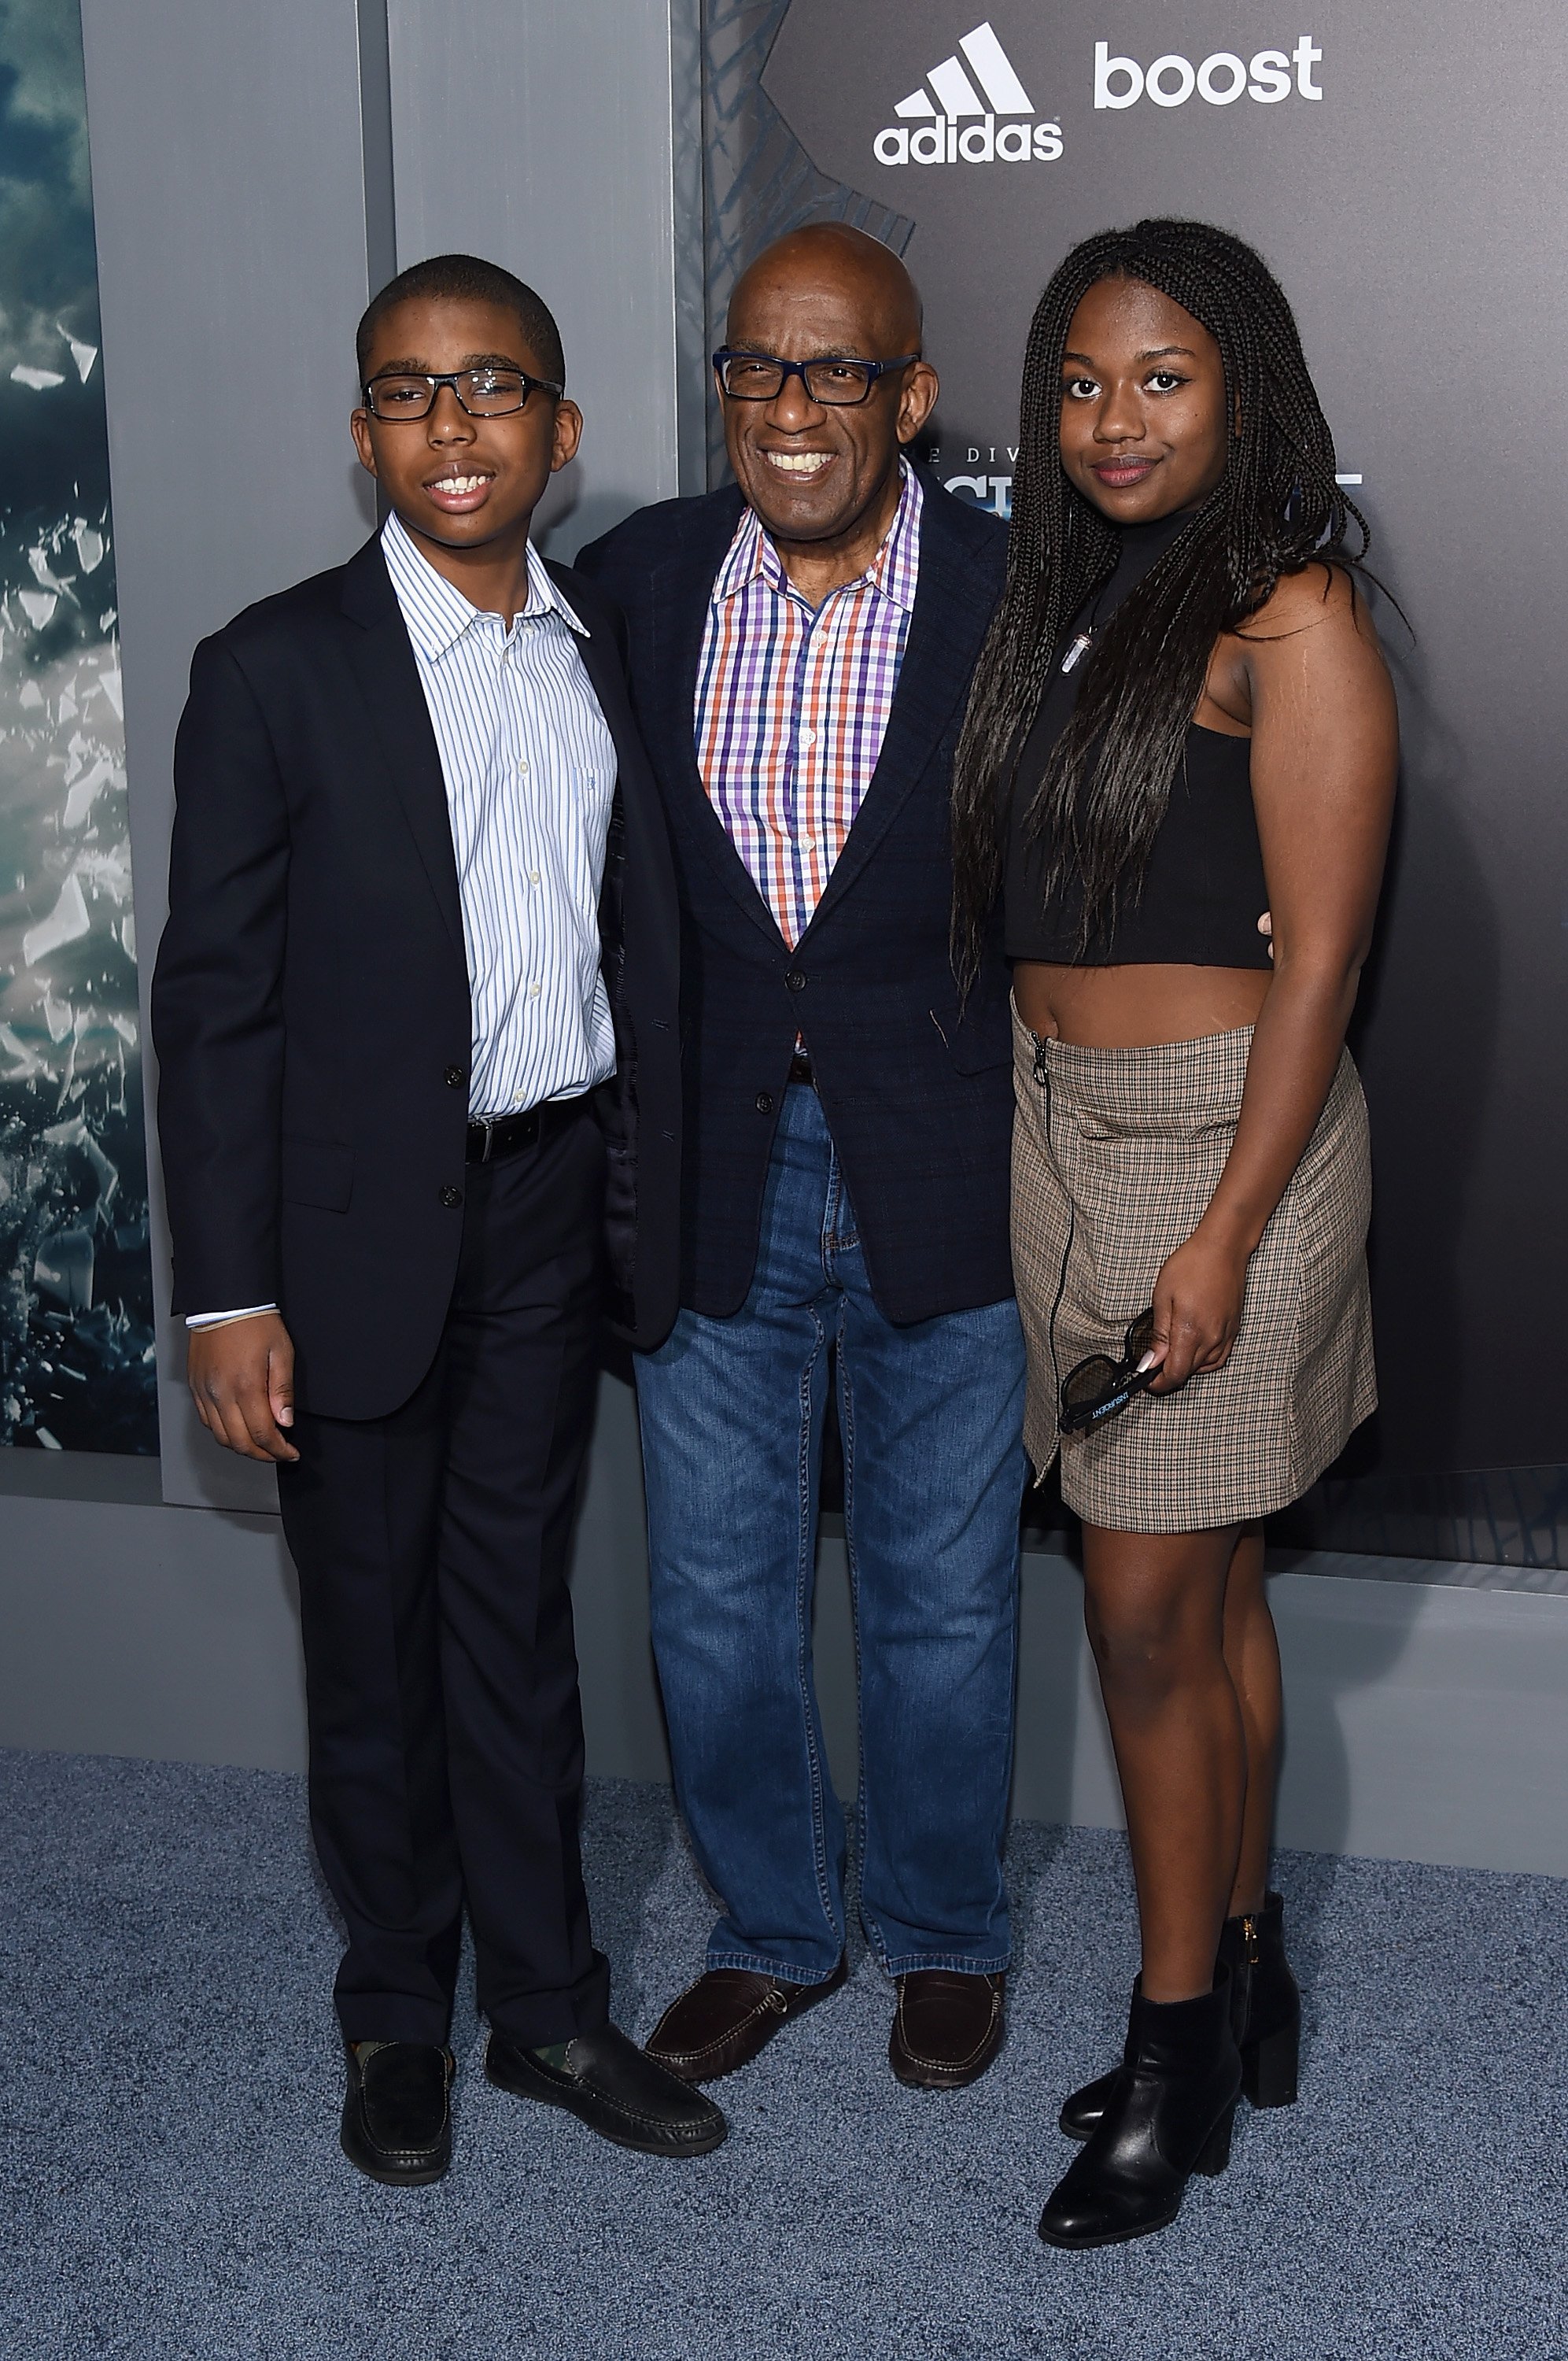 Nicholas Albert Roker, Al Roker (C), and Leila Roker attends "The Divergent Series: Insurgent" New York premiere at Ziegfeld Theater on March 16, 2015, in New York City. | Source: Getty Images.